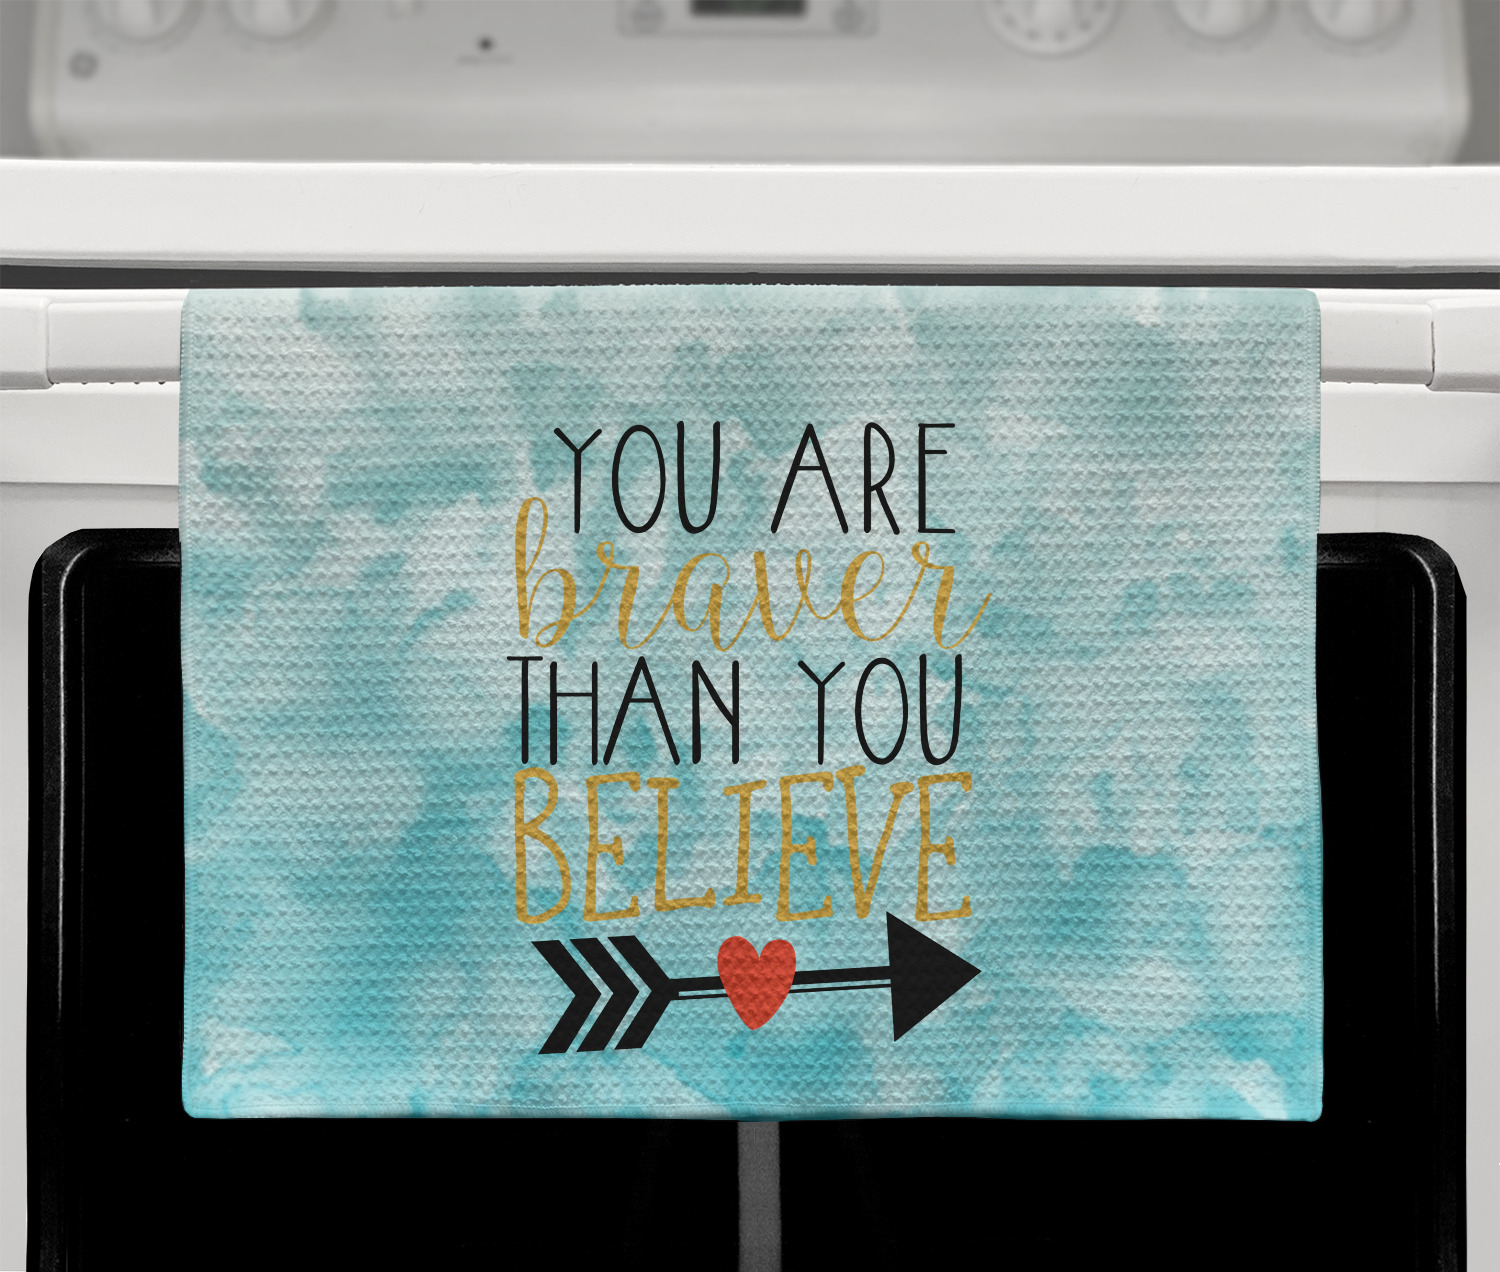 https://www.youcustomizeit.com/common/MAKE/1095102/Inspirational-Quotes-Waffle-Weave-Towel-Full-Print-LIFESTYLE-1-wht-oven.jpg?lm=1697658898